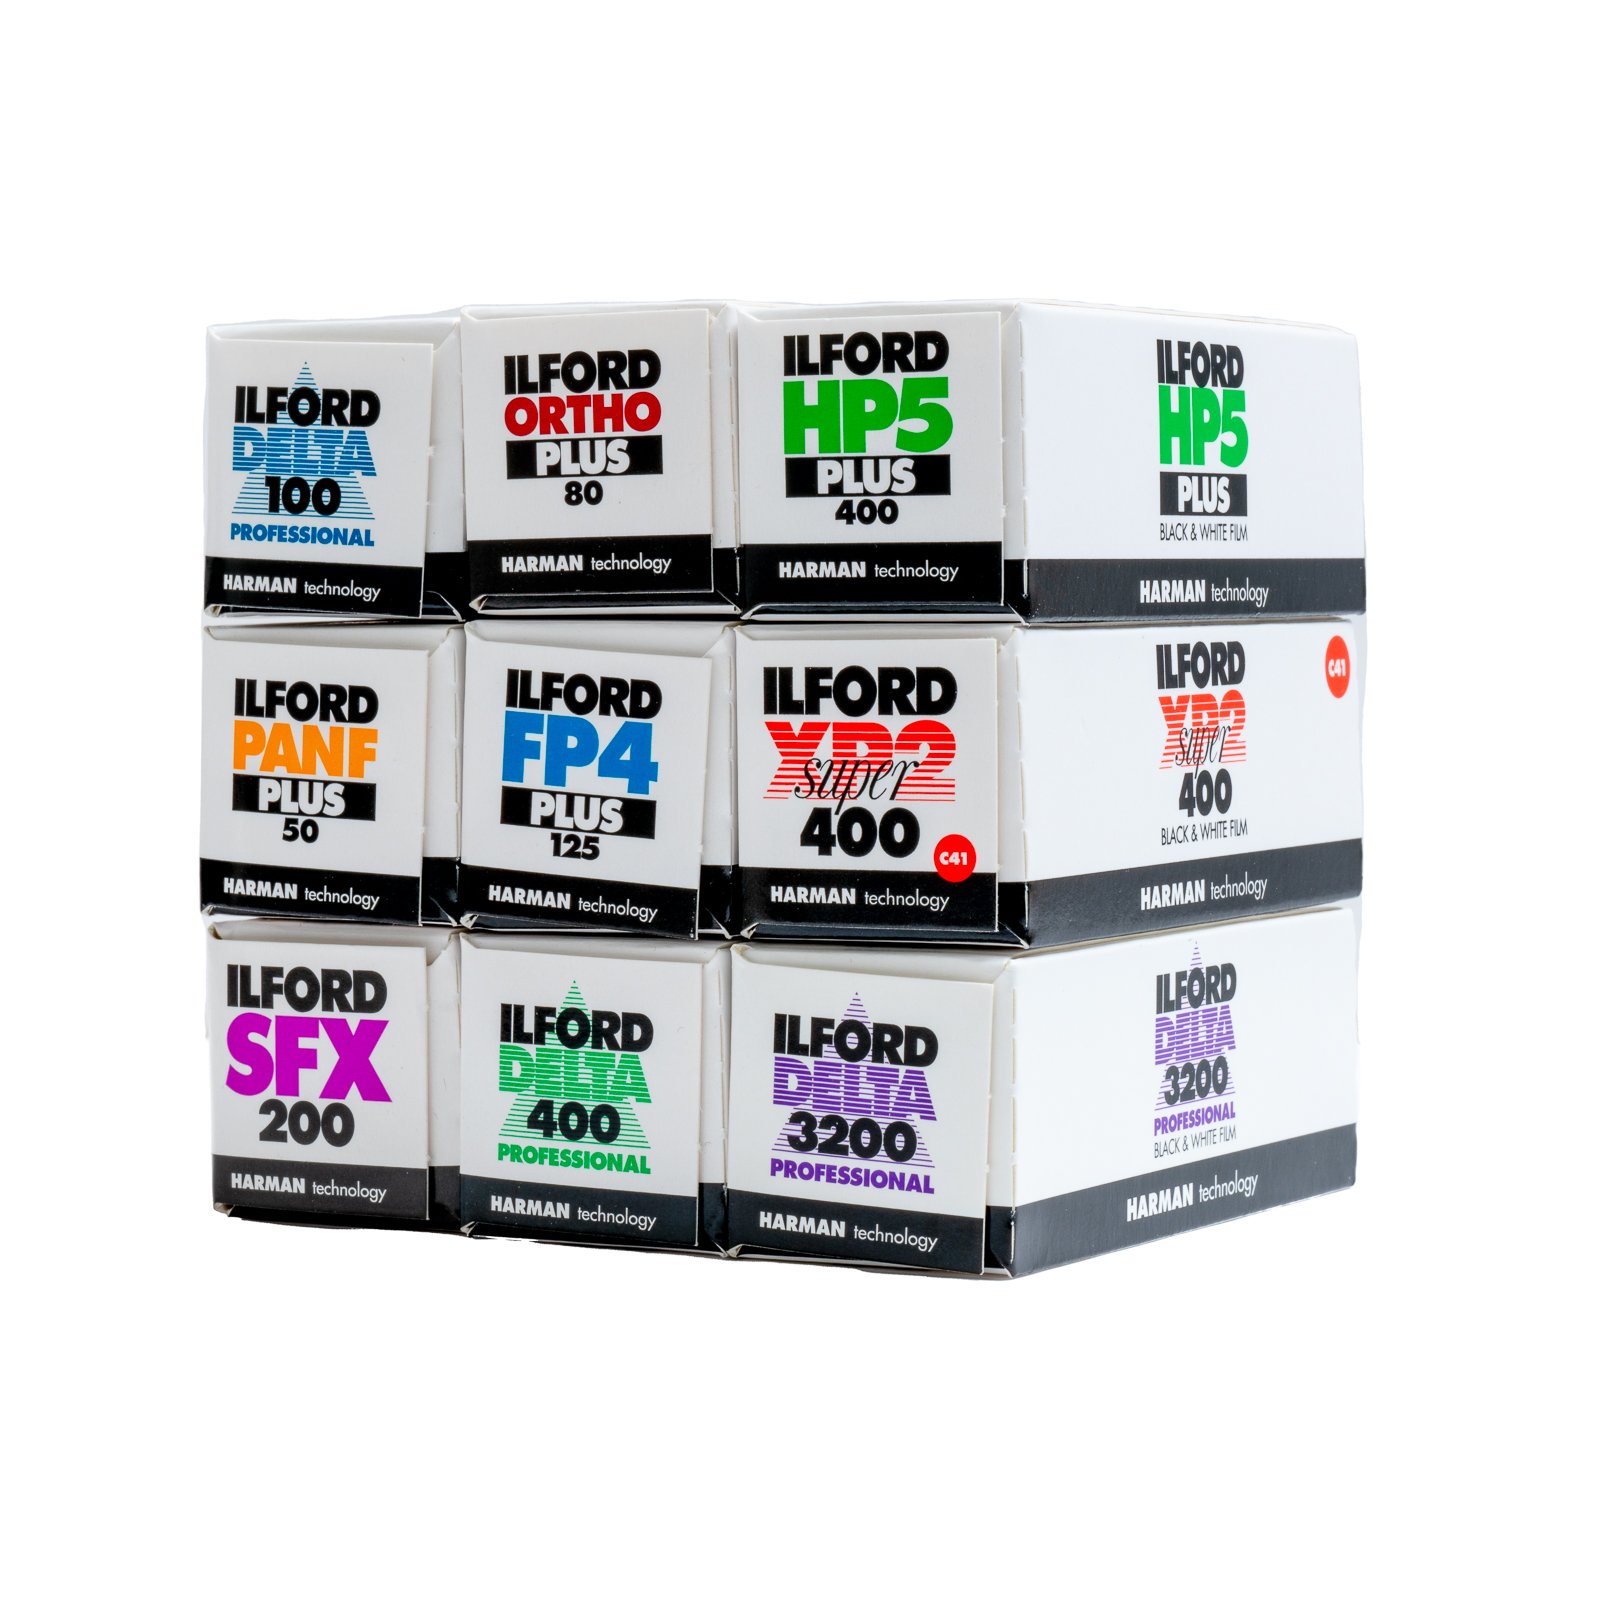 Pack of 10 Ilford Ortho Plus 120 Film Roll 